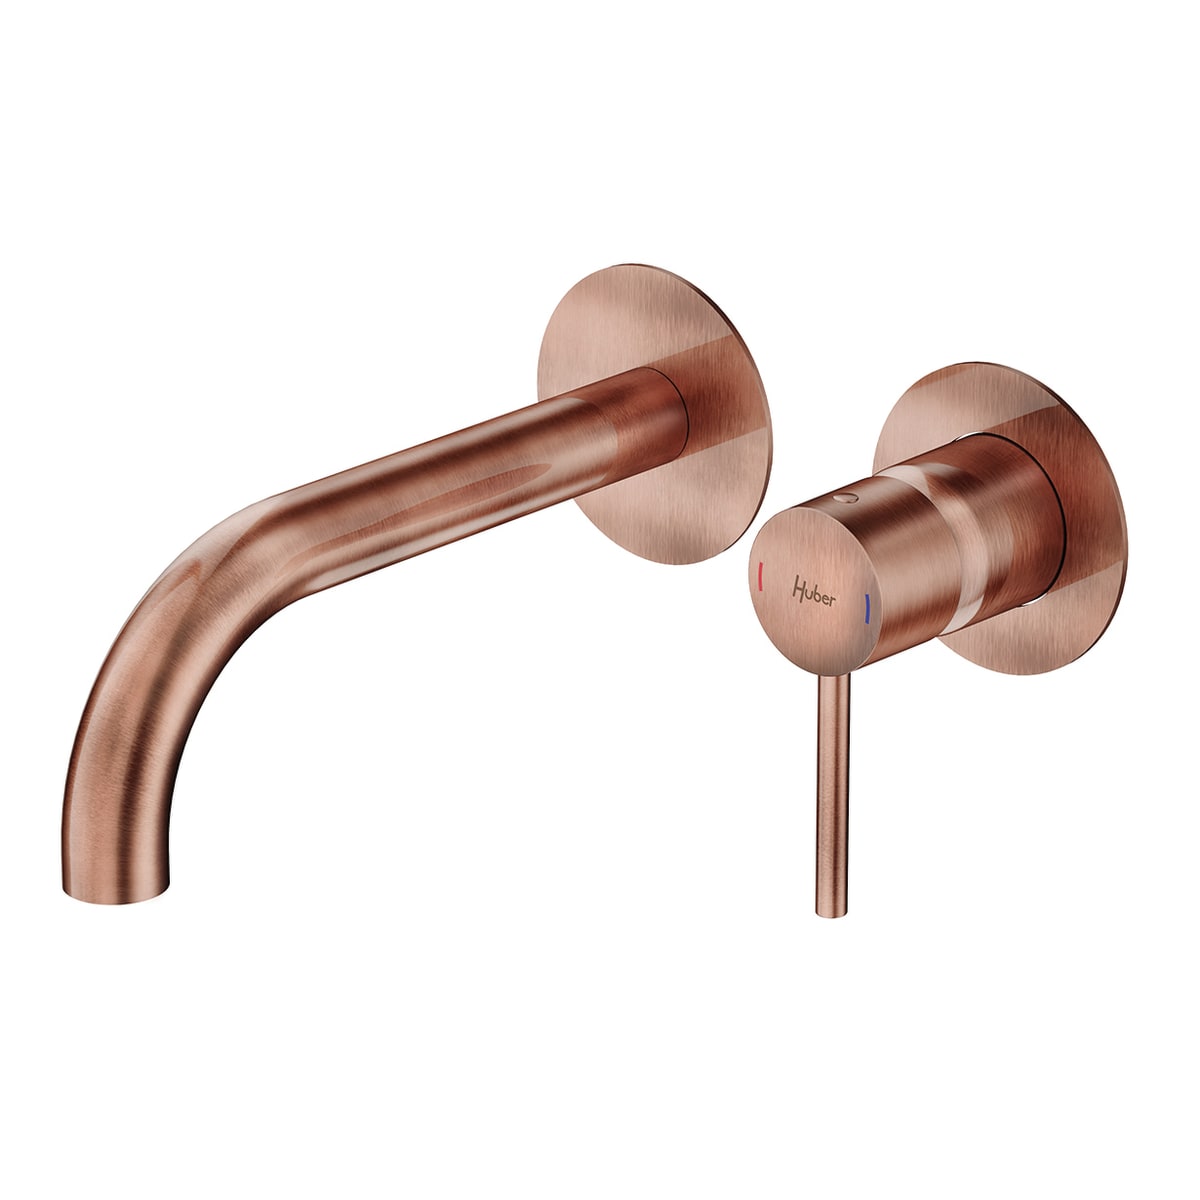 CONCEALED WALL-MOUNTED WASHBASIN MIXER TAYRONA COPPER - best price from Maltashopper.com BR430009324